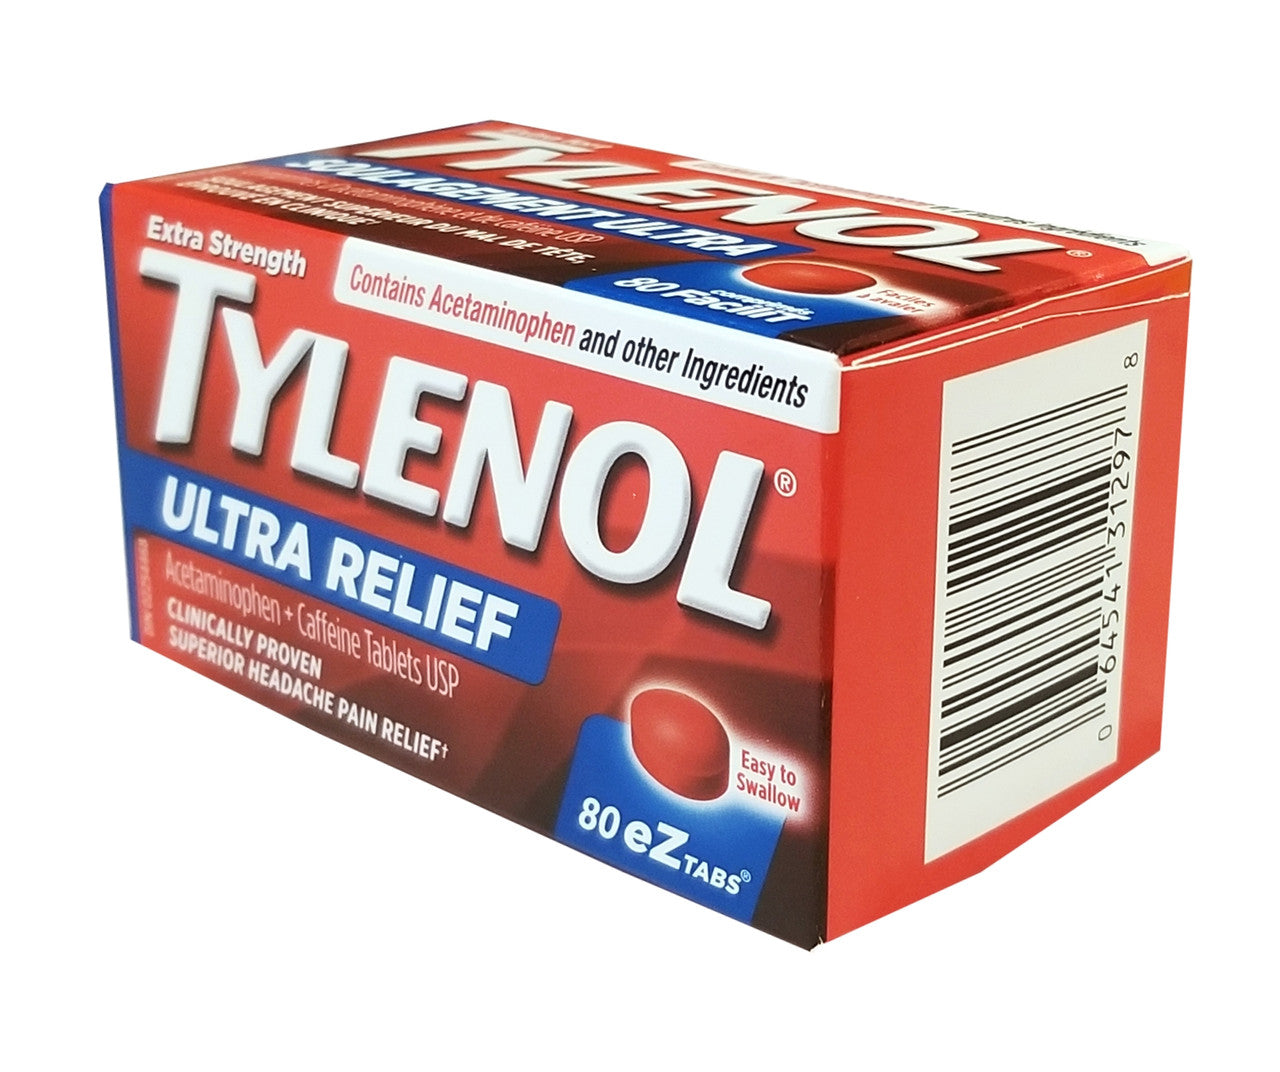 Tylenol Extra Strength Ultra Relief eZ 80 tabs, 500mg Acetaminophen{Imported from Canada}